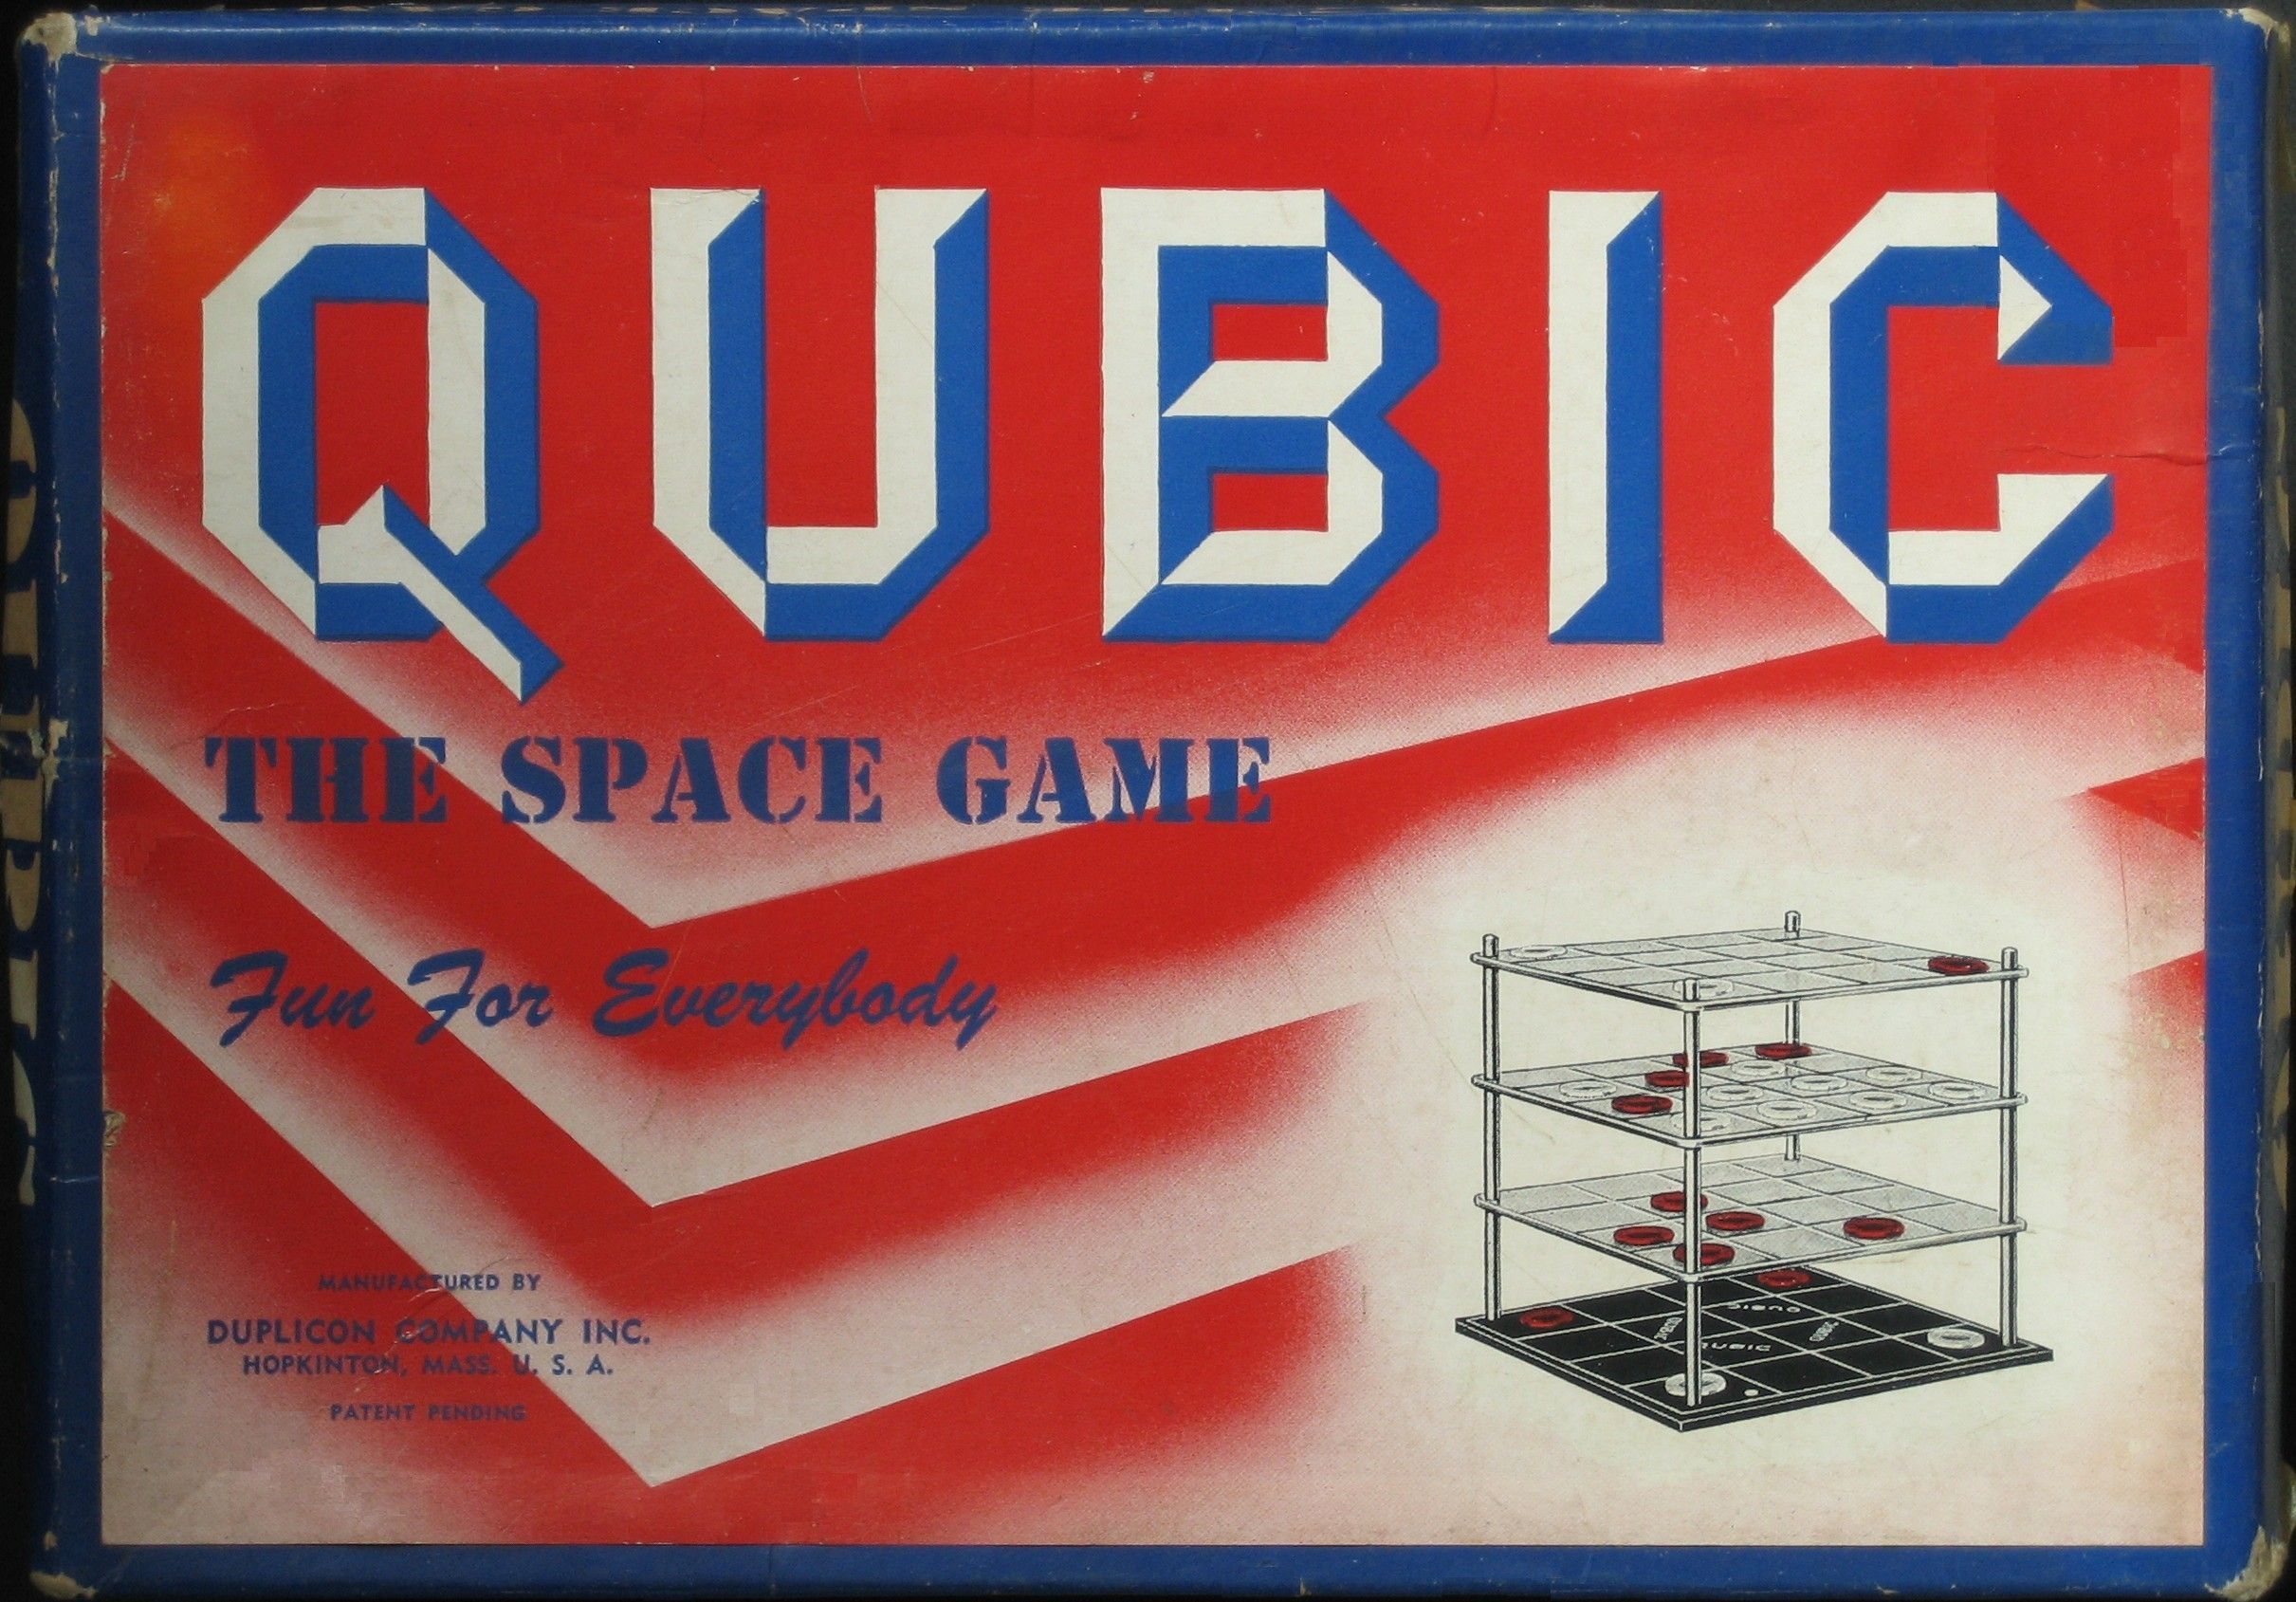 Board Game: Qubic